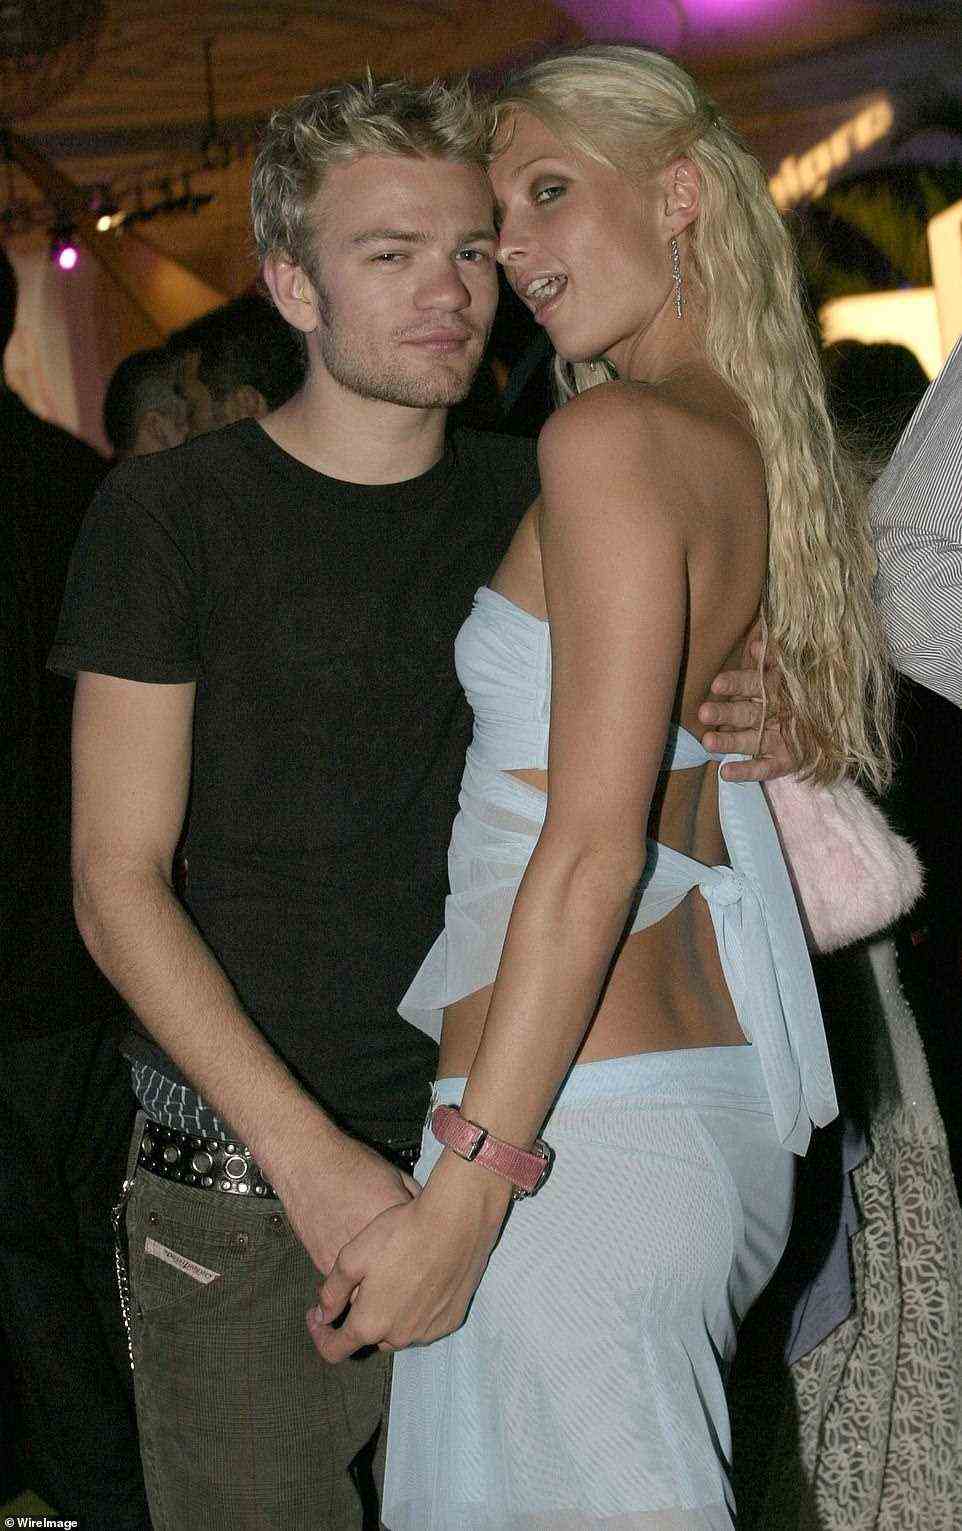 The internet was pretty shook when Paris and Deryck Whibley were spotted kissing and cozying up in 2003